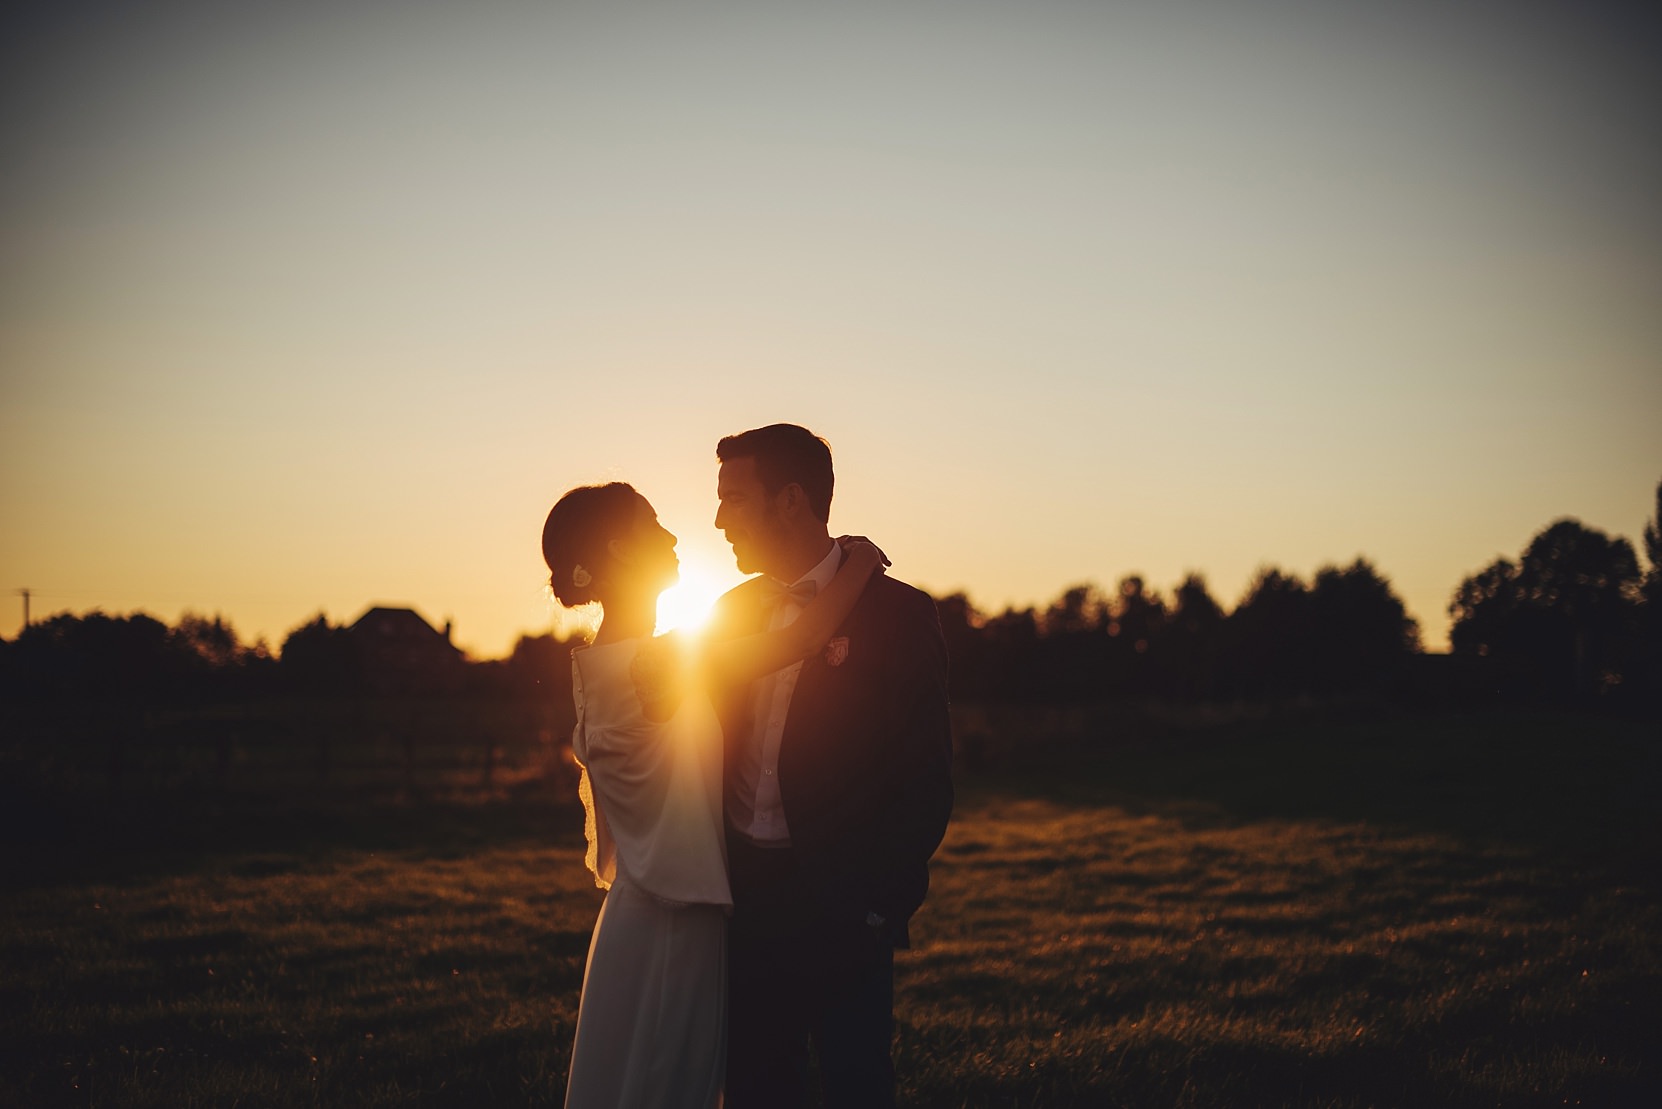 Bride and Groom at sunset in an open field